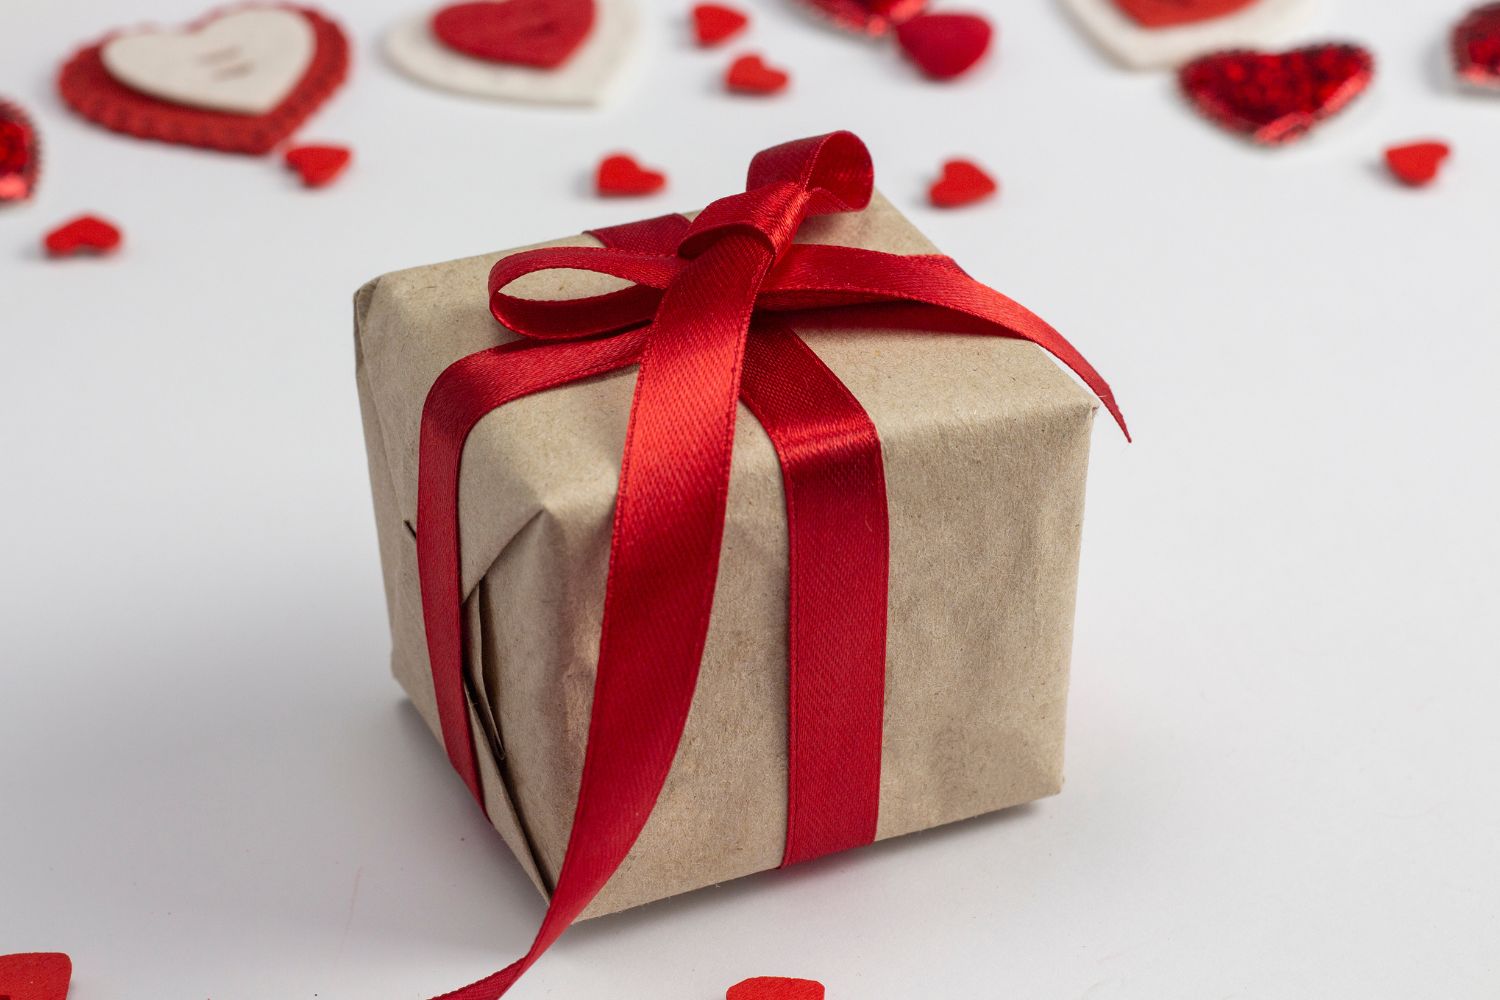 Give your Valentine a Bloom Box as a gift